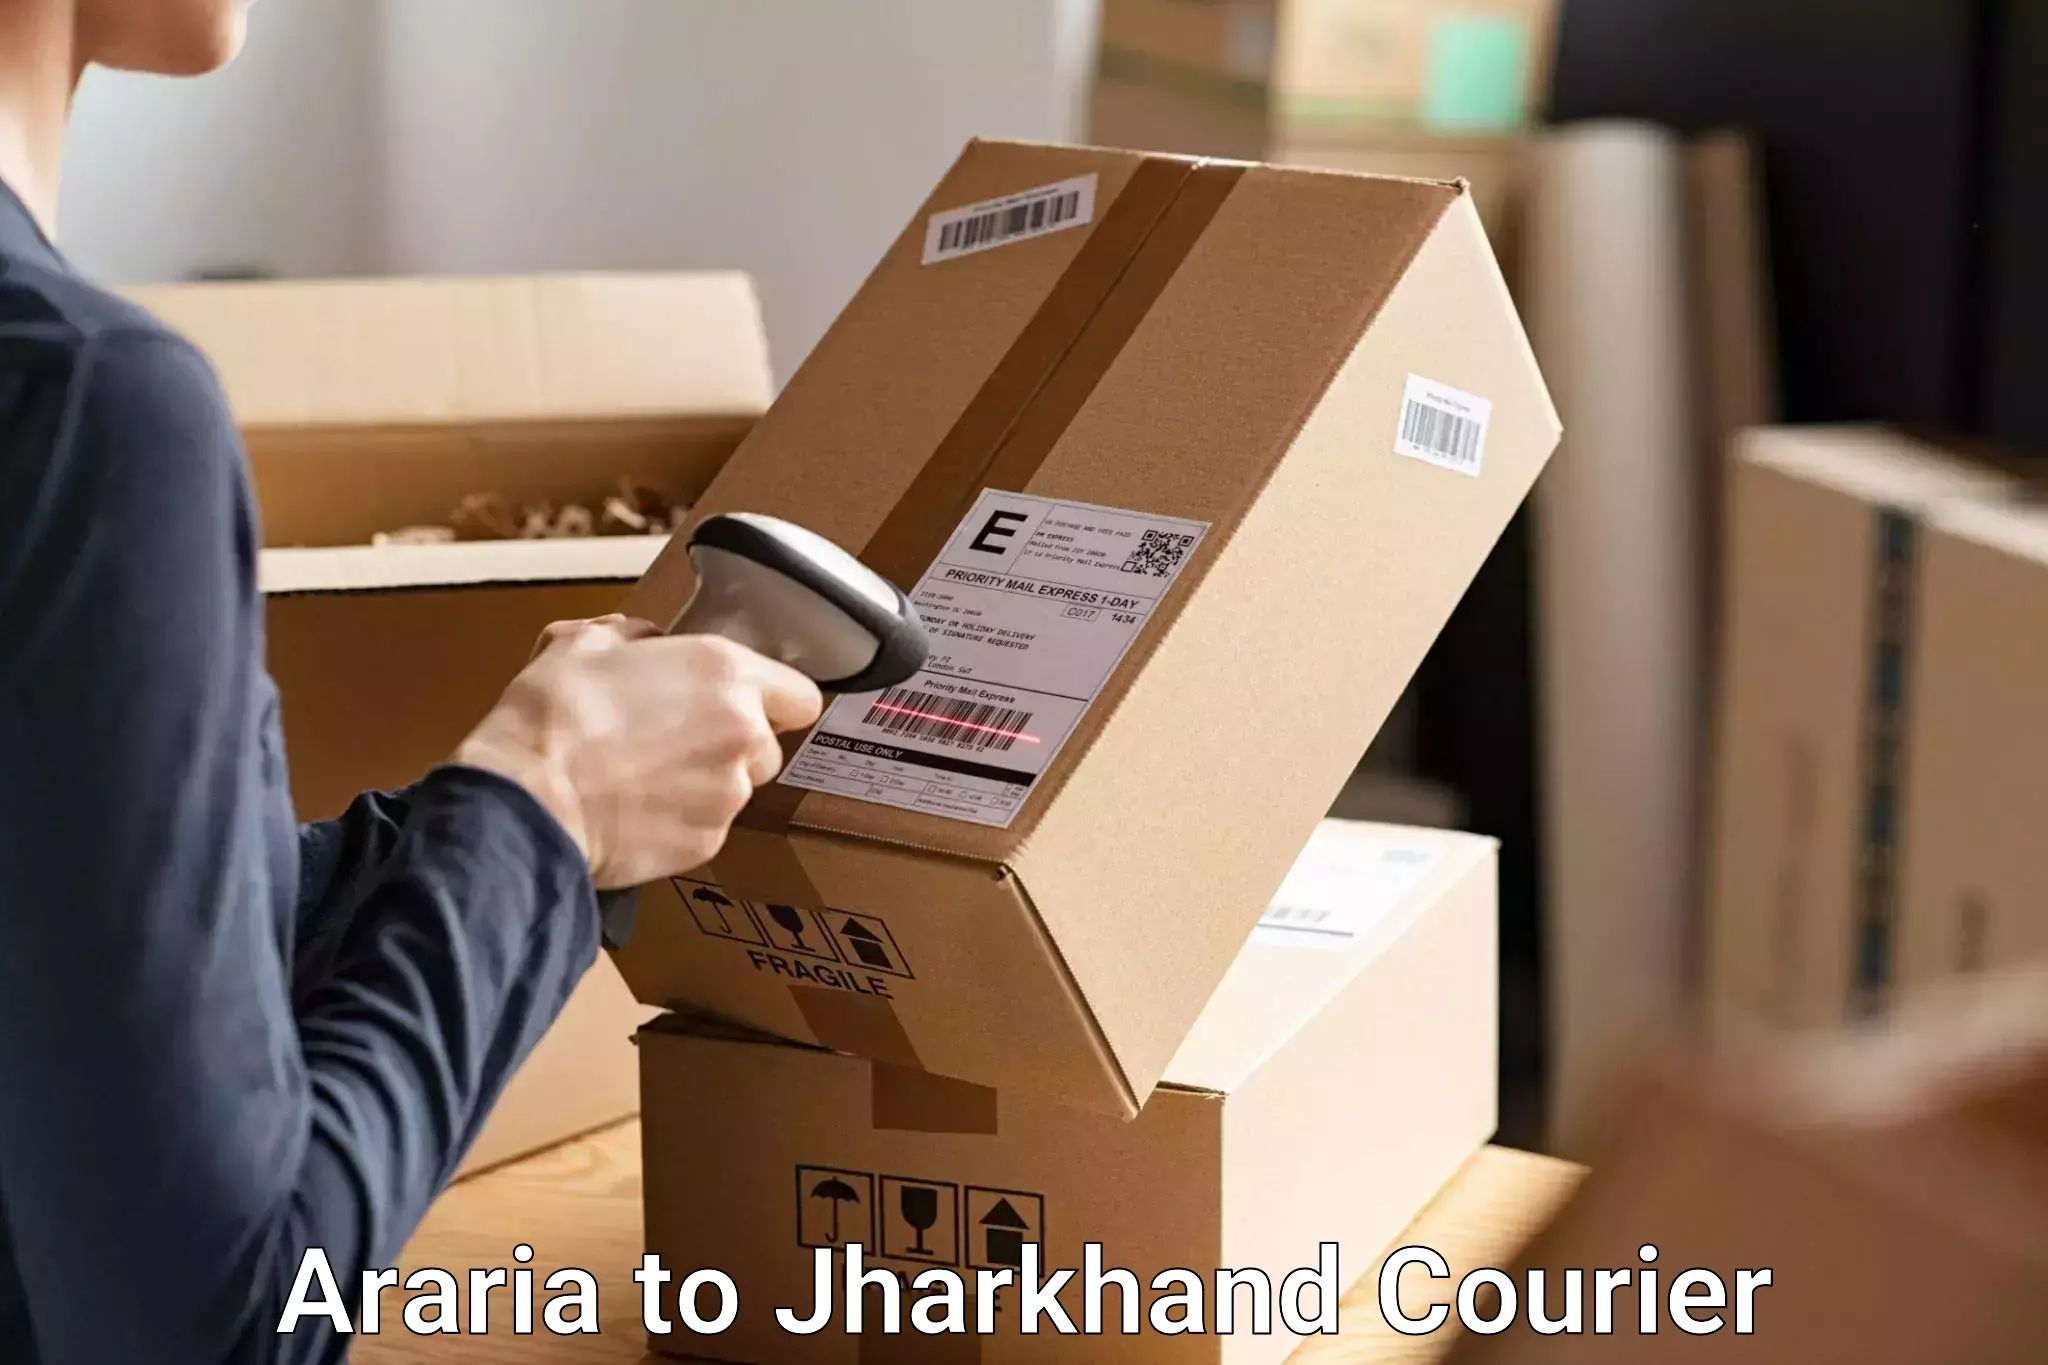 Luggage transport service Araria to Jharkhand